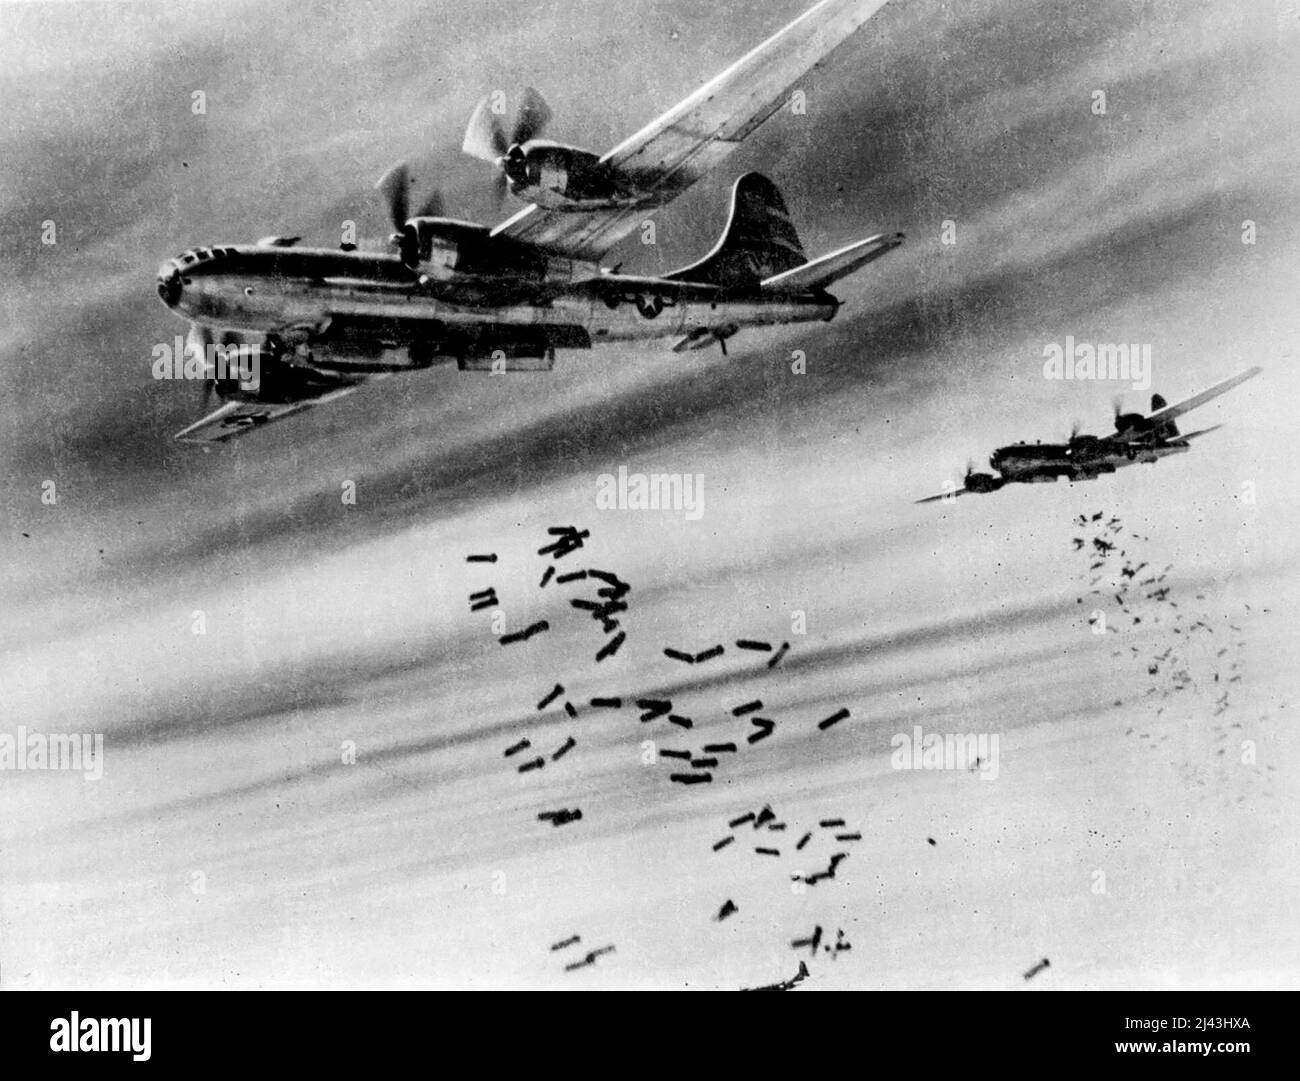 Superfortress Bombs Over Burma. Tons of bombs speckle the sky over Rangoon, Burma, as they spew from the yawning bomb bays of B-29 Superfortresses. The target of this daylight attack by the 20th Bomber Command B-29s was a large Japanese supply depot near the Mingaladon Air Field near Rangoon. January 3, 1945. (Photo by Associated Press Photo). Stock Photo